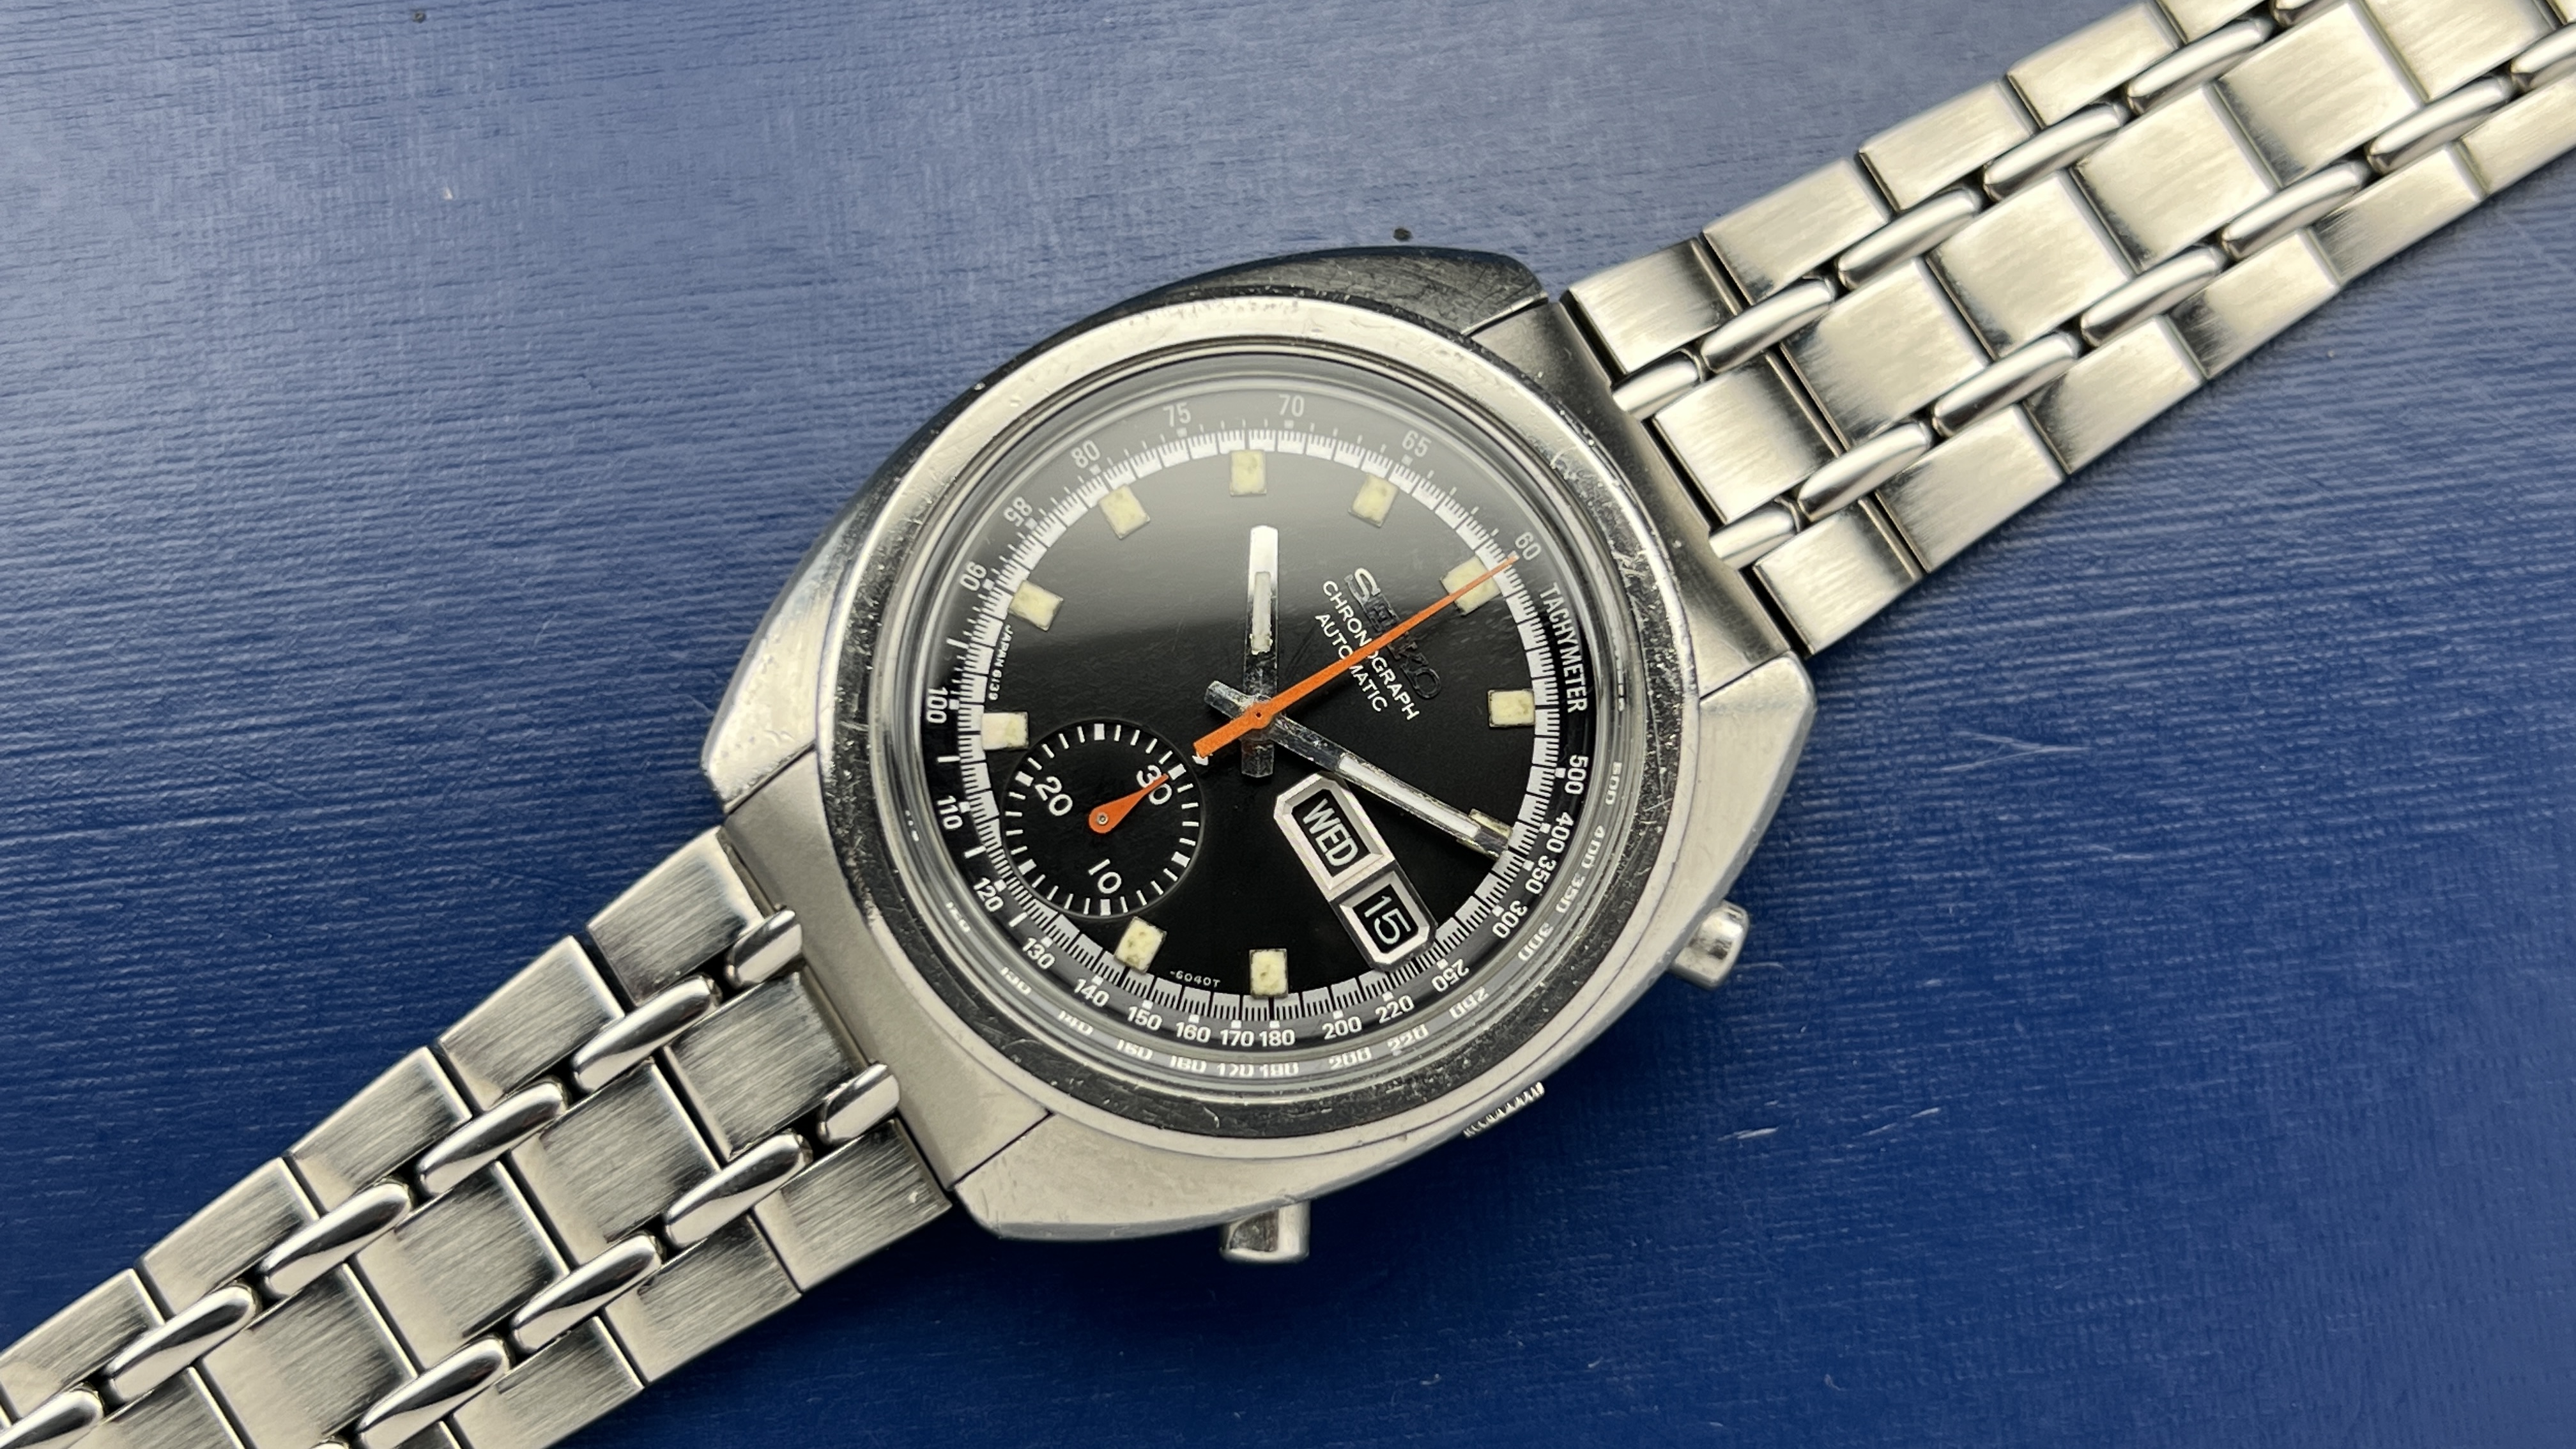 SOLD — Seiko 6139-6012 “Bruce Lee”